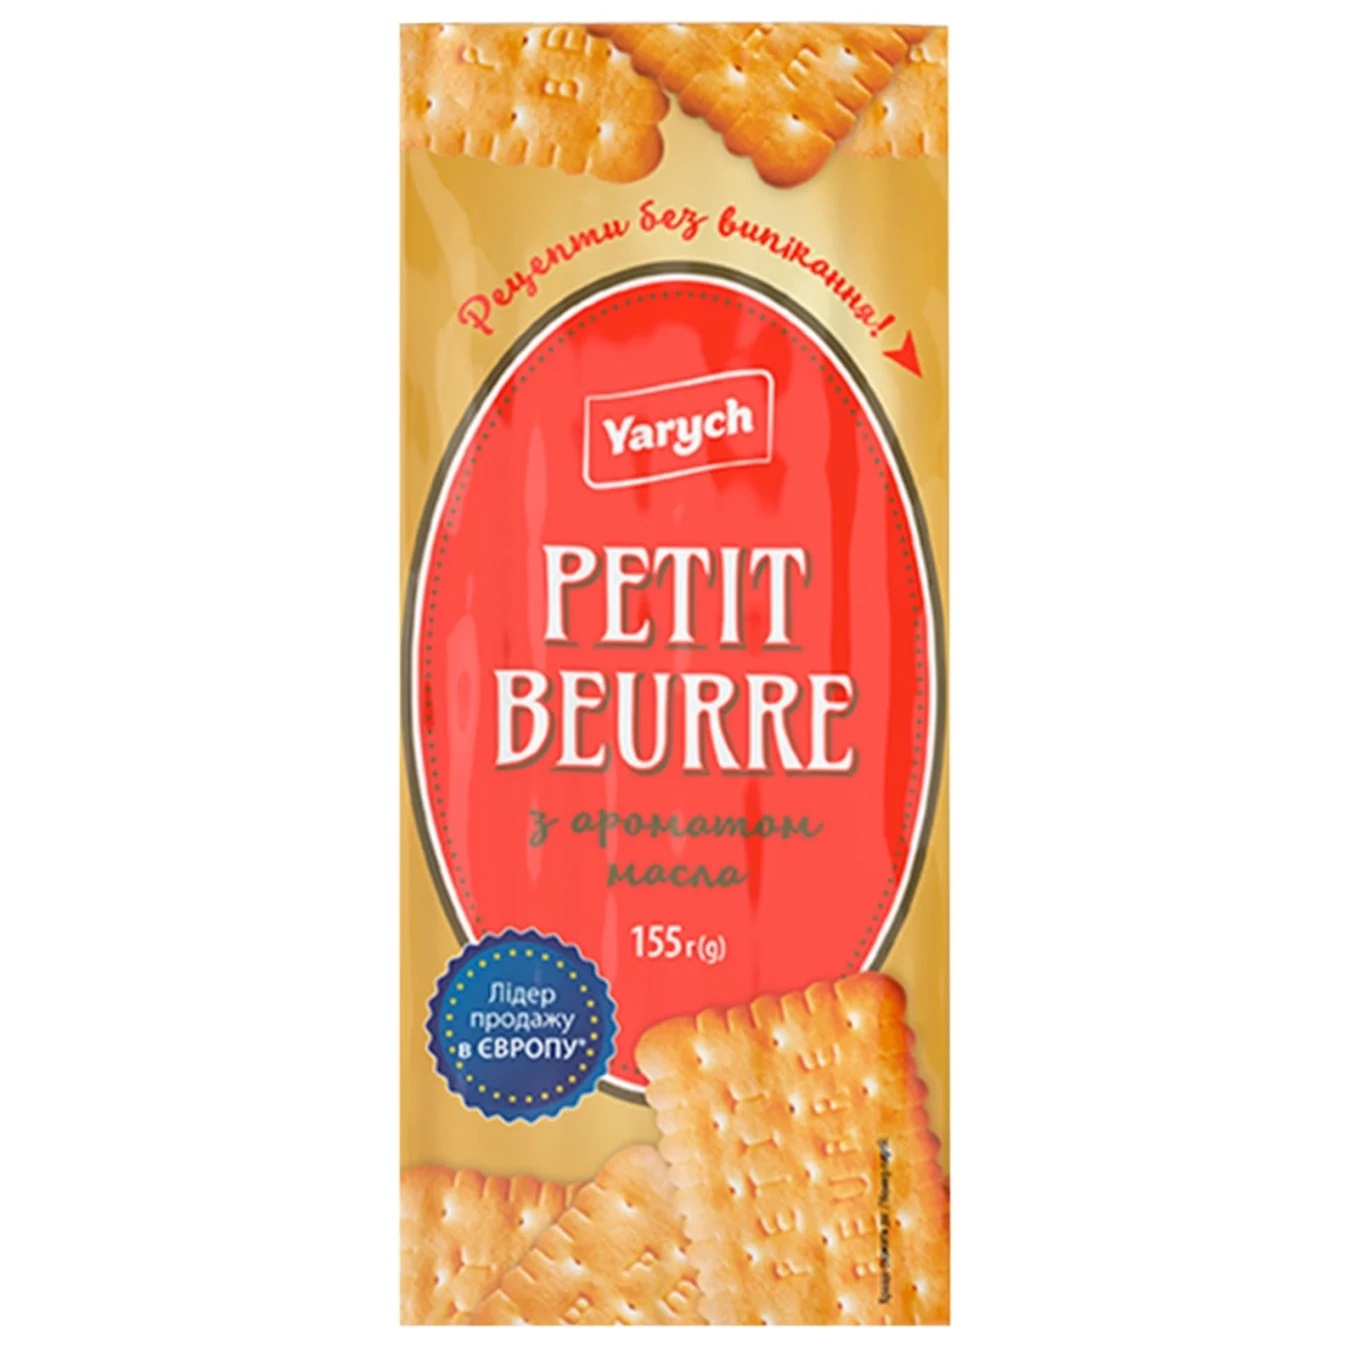 Yarych long petit beurre cookies with butter aroma 155g 3